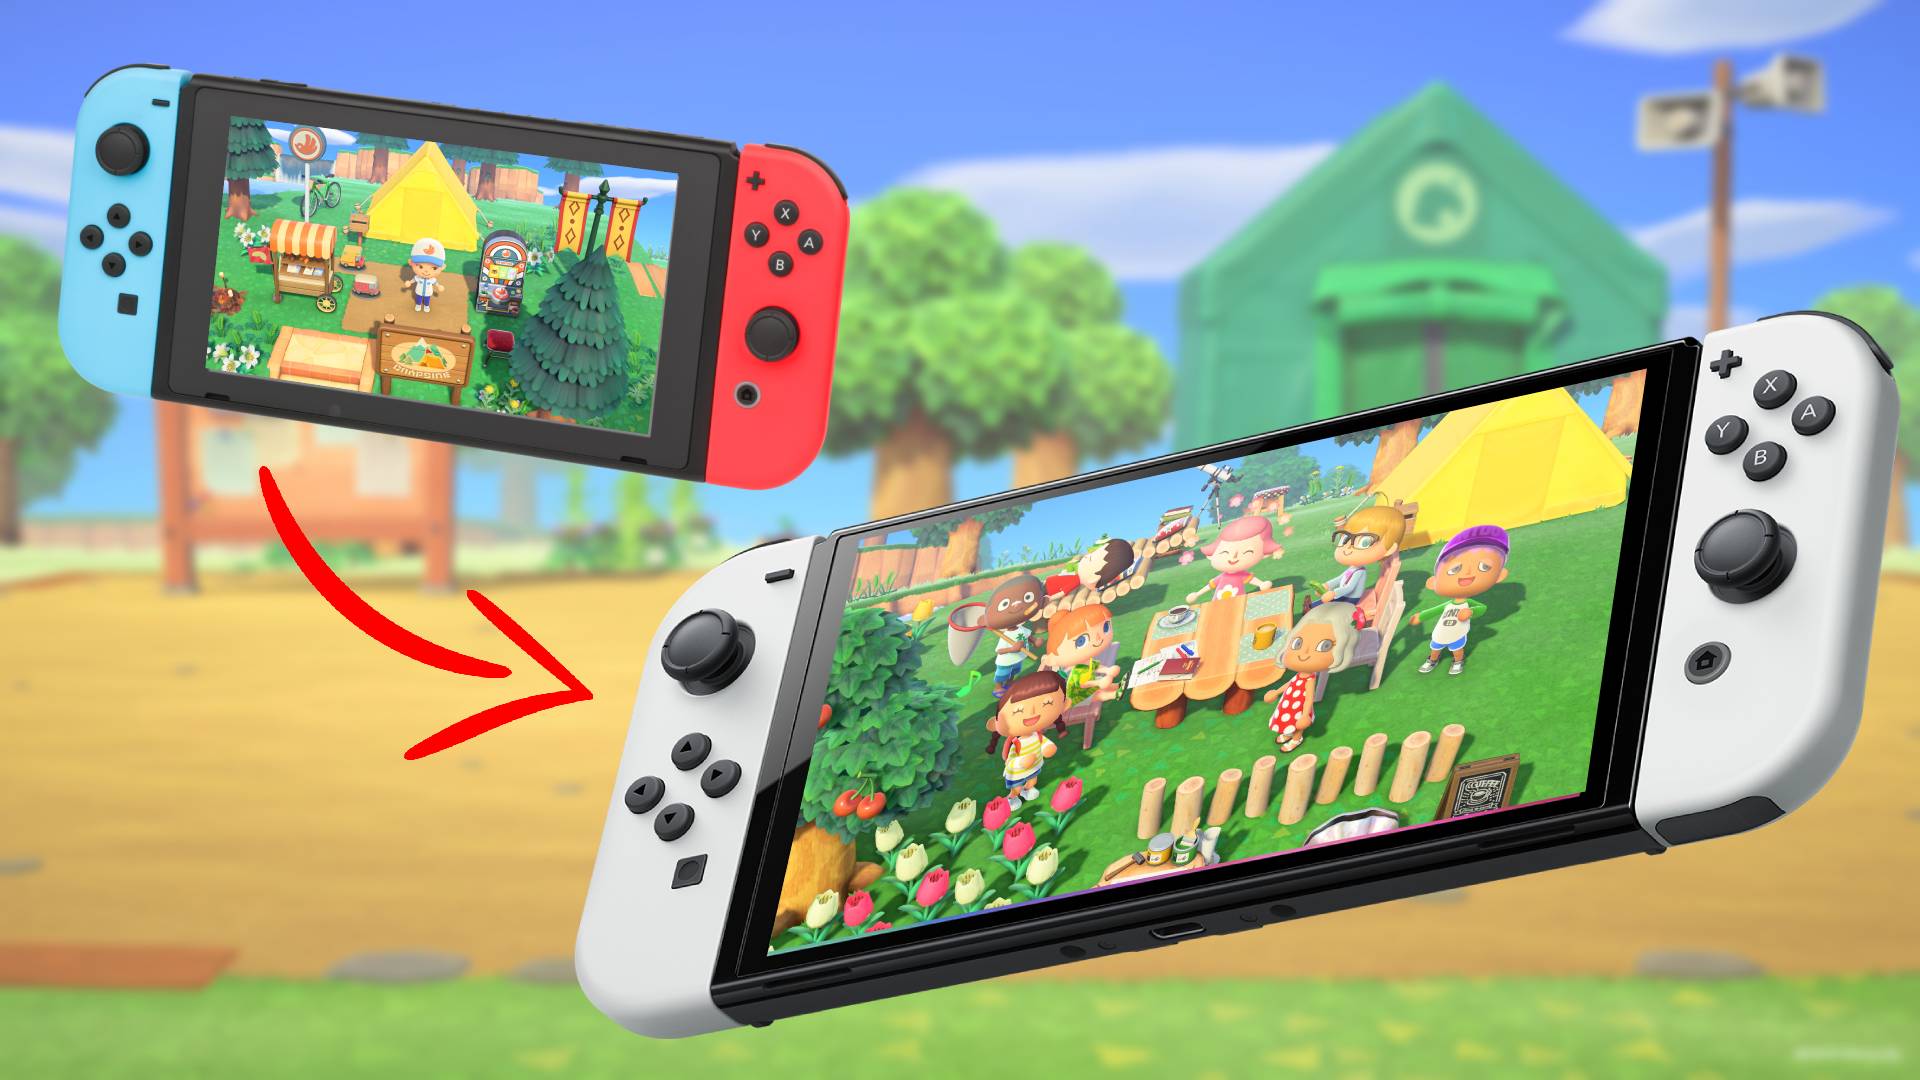 Nintendo Switch data transfer – OLED, animal crossing, and other save data  | Pocket Tactics